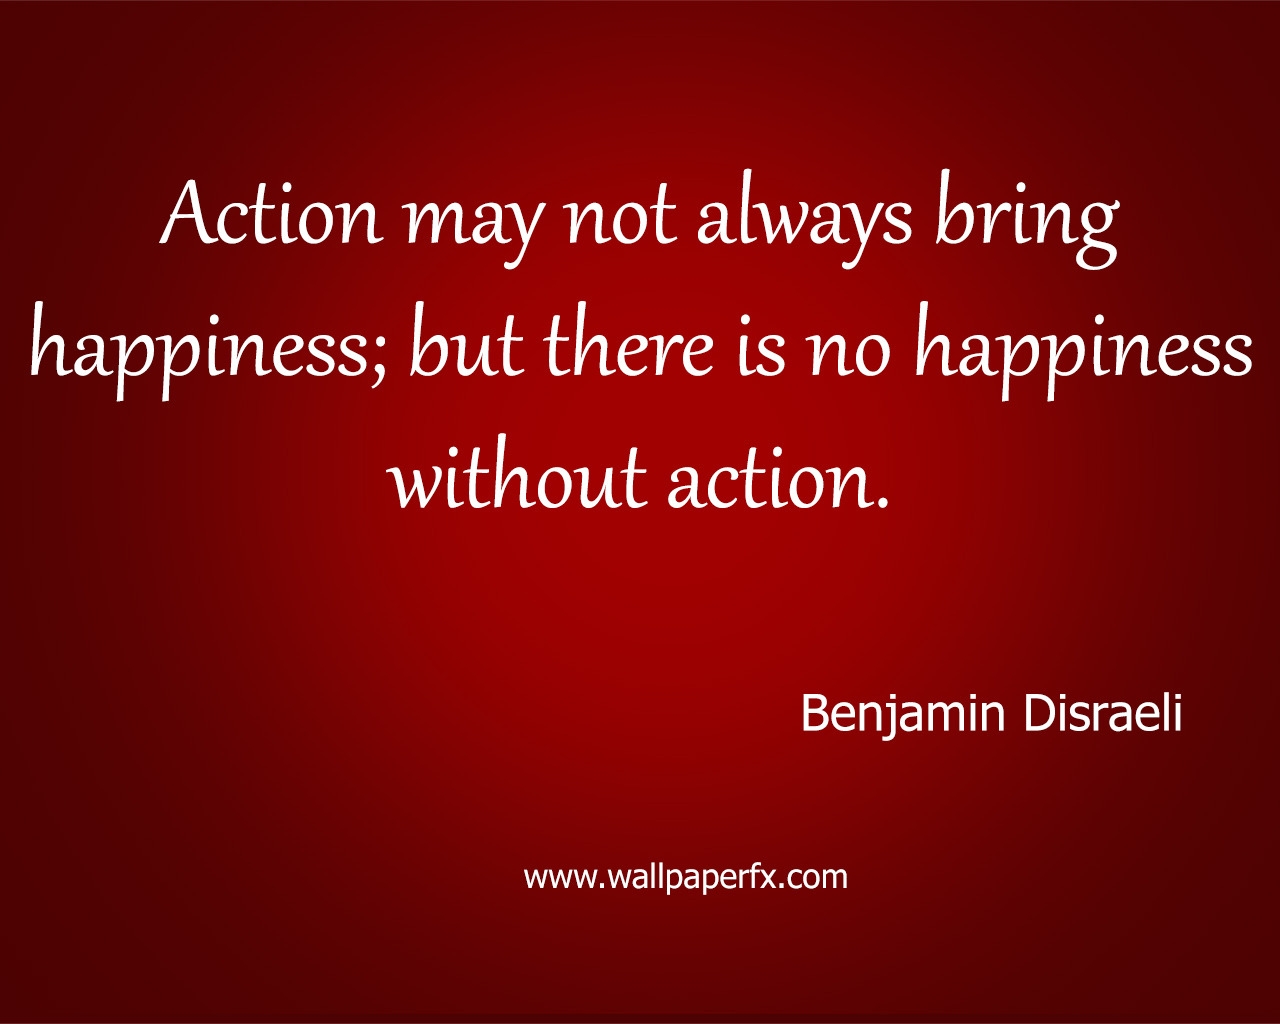 Benjamin Disraeli Happiness Quote for 1280 x 1024 resolution